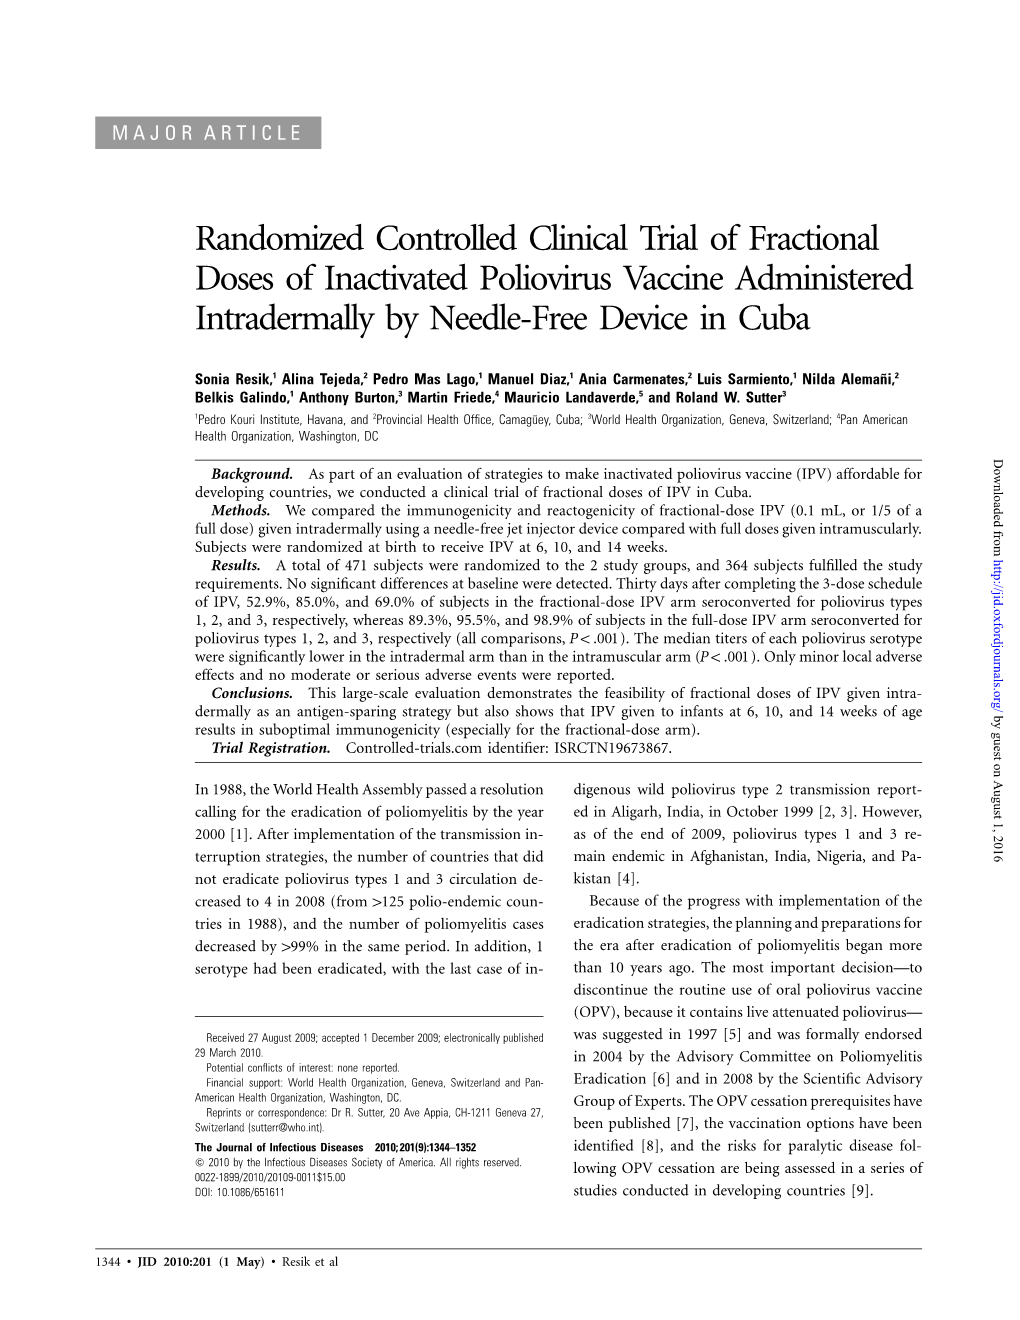 Randomized Controlled Clinical Trial of Fractional Doses of Inactivated Poliovirus Vaccine Administered Intradermally by Needle-Free Device in Cuba